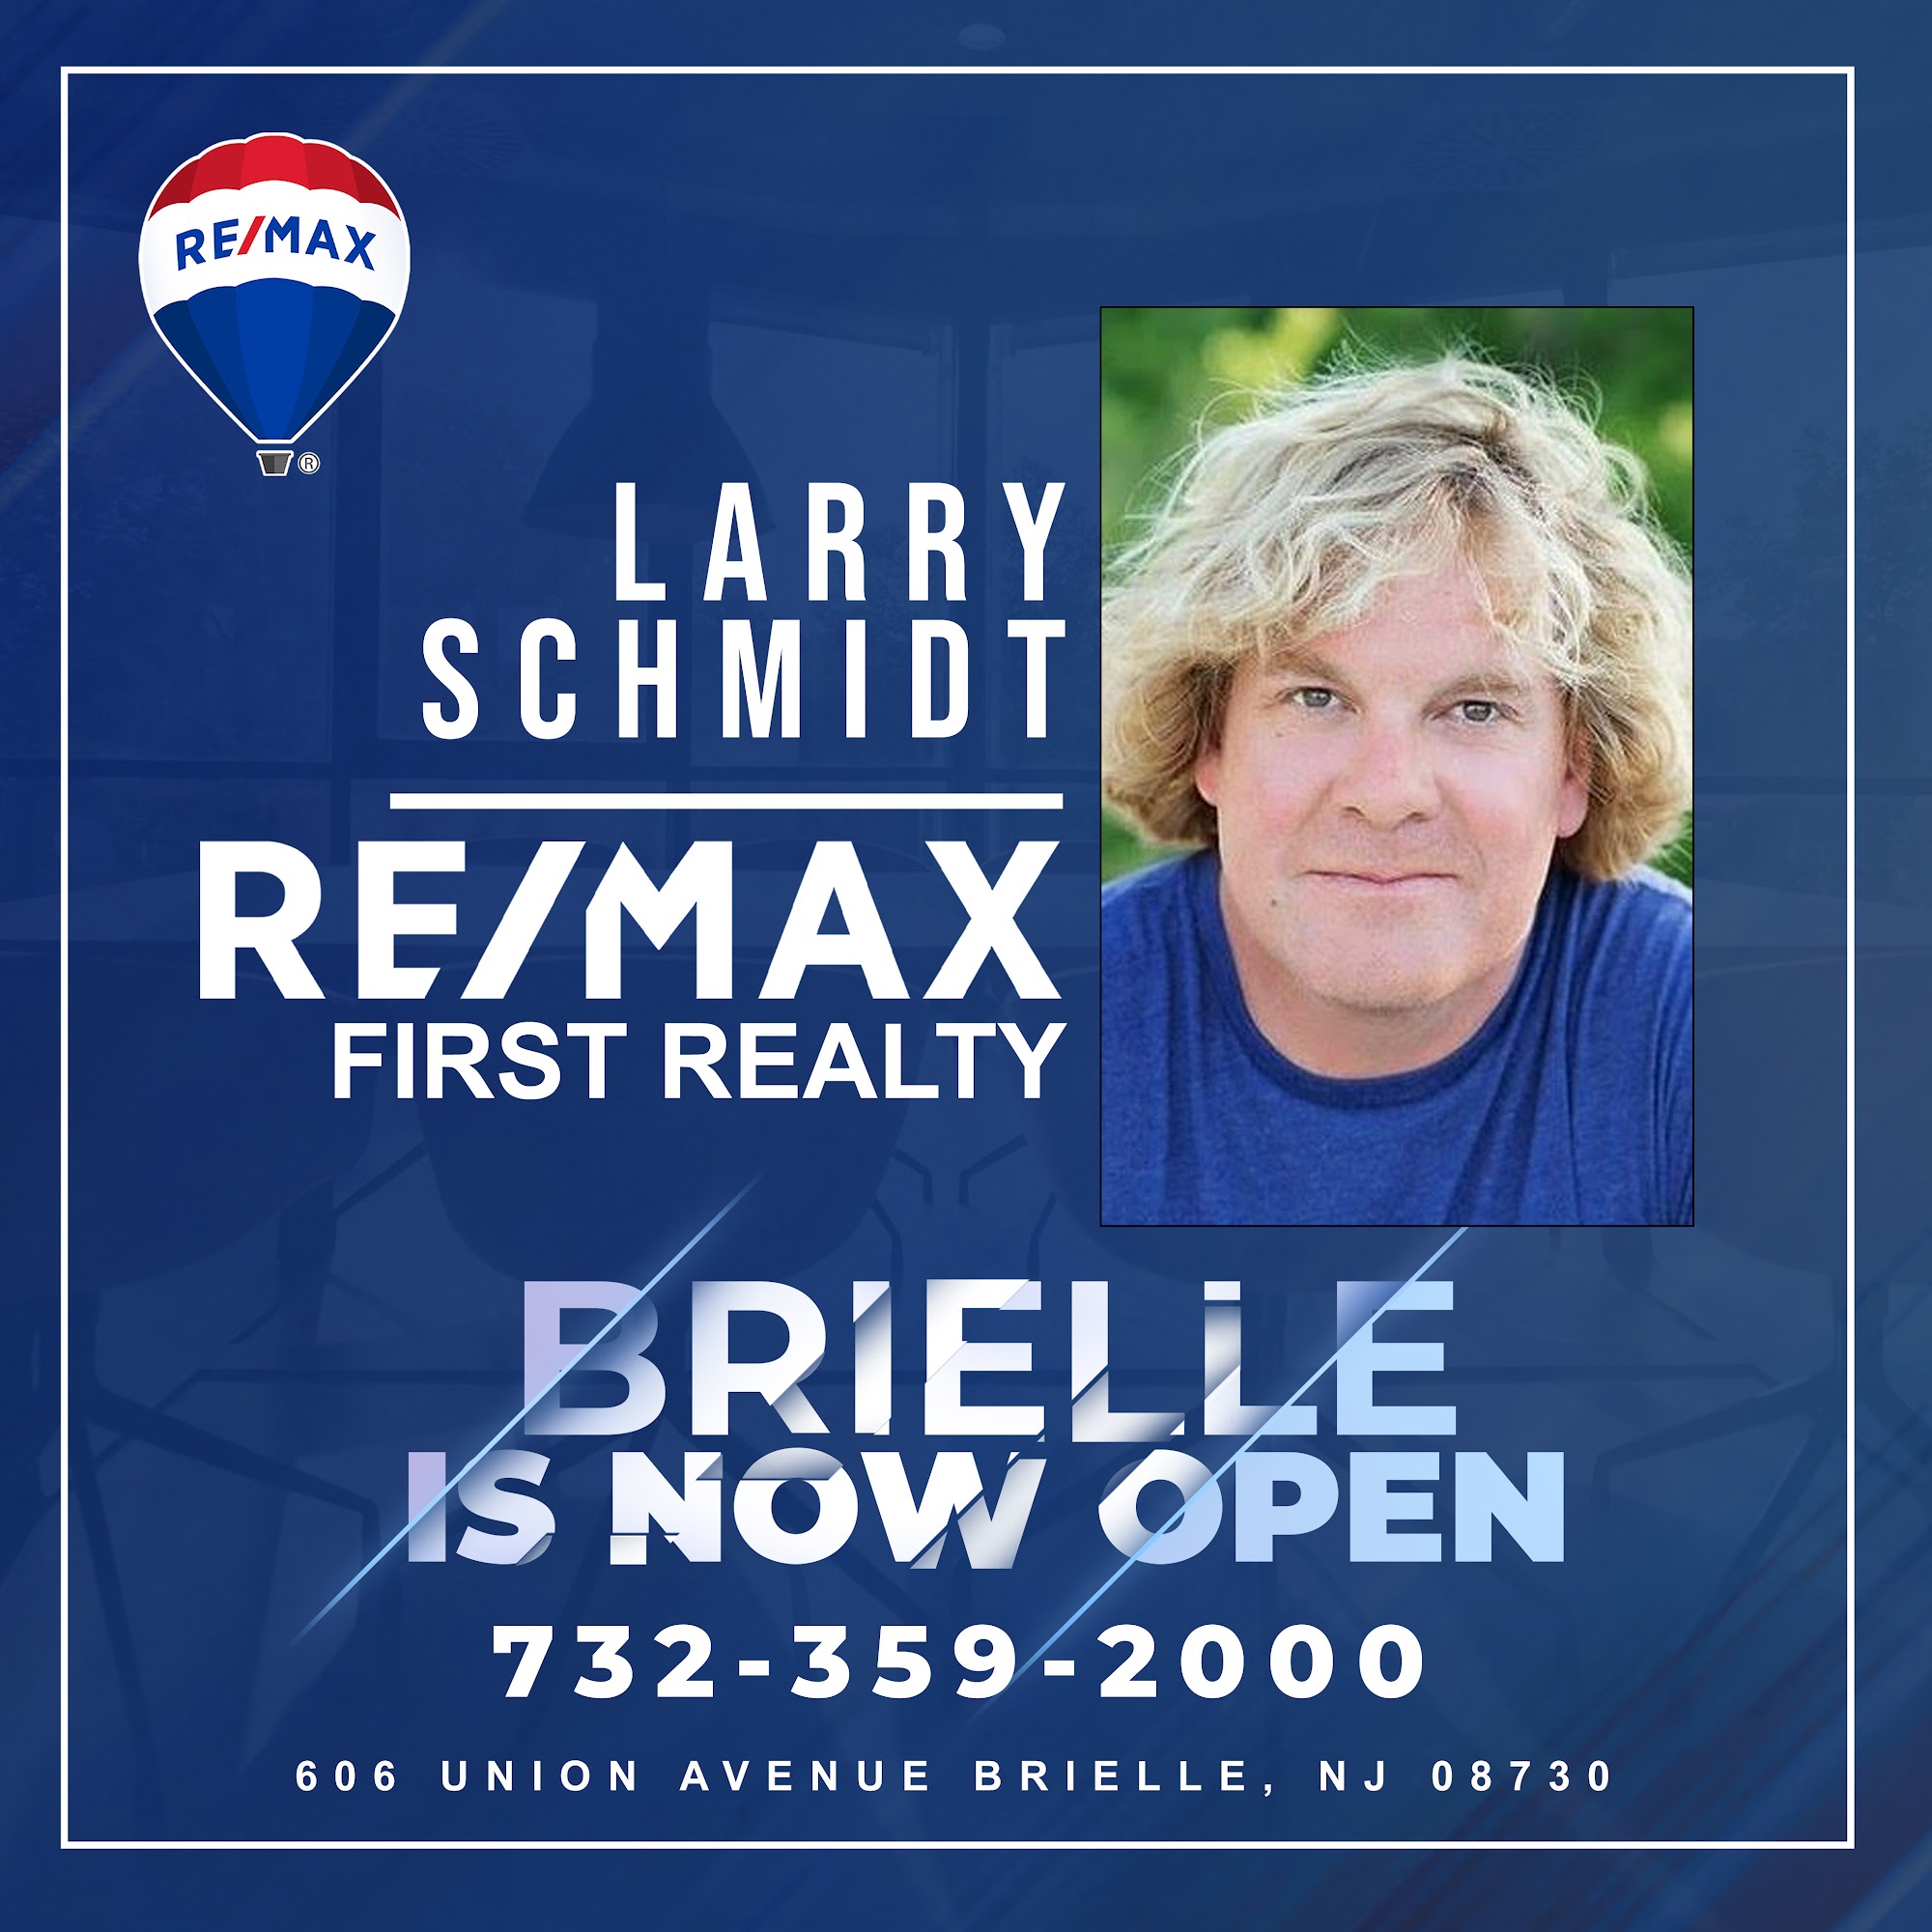 Larry Schmidt - RE/MAX First Realty